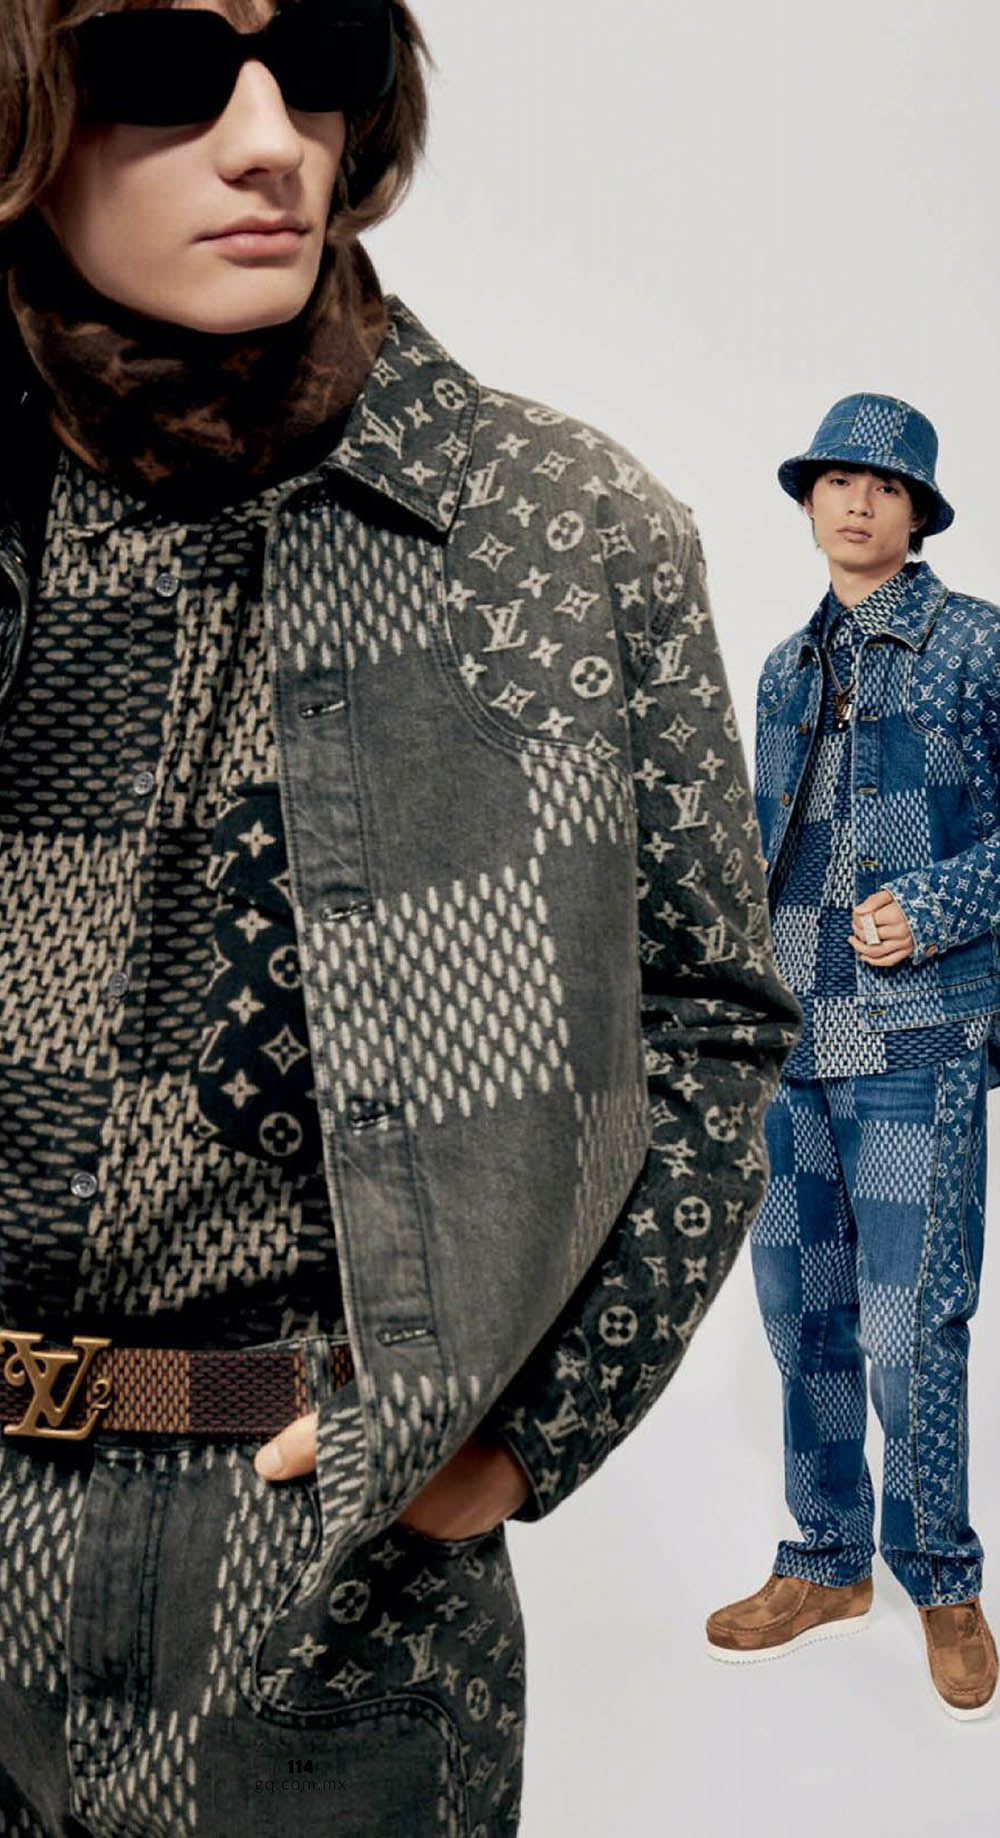 ''LV2'' by Norbert Schoerner for GQ Mexico August 2020